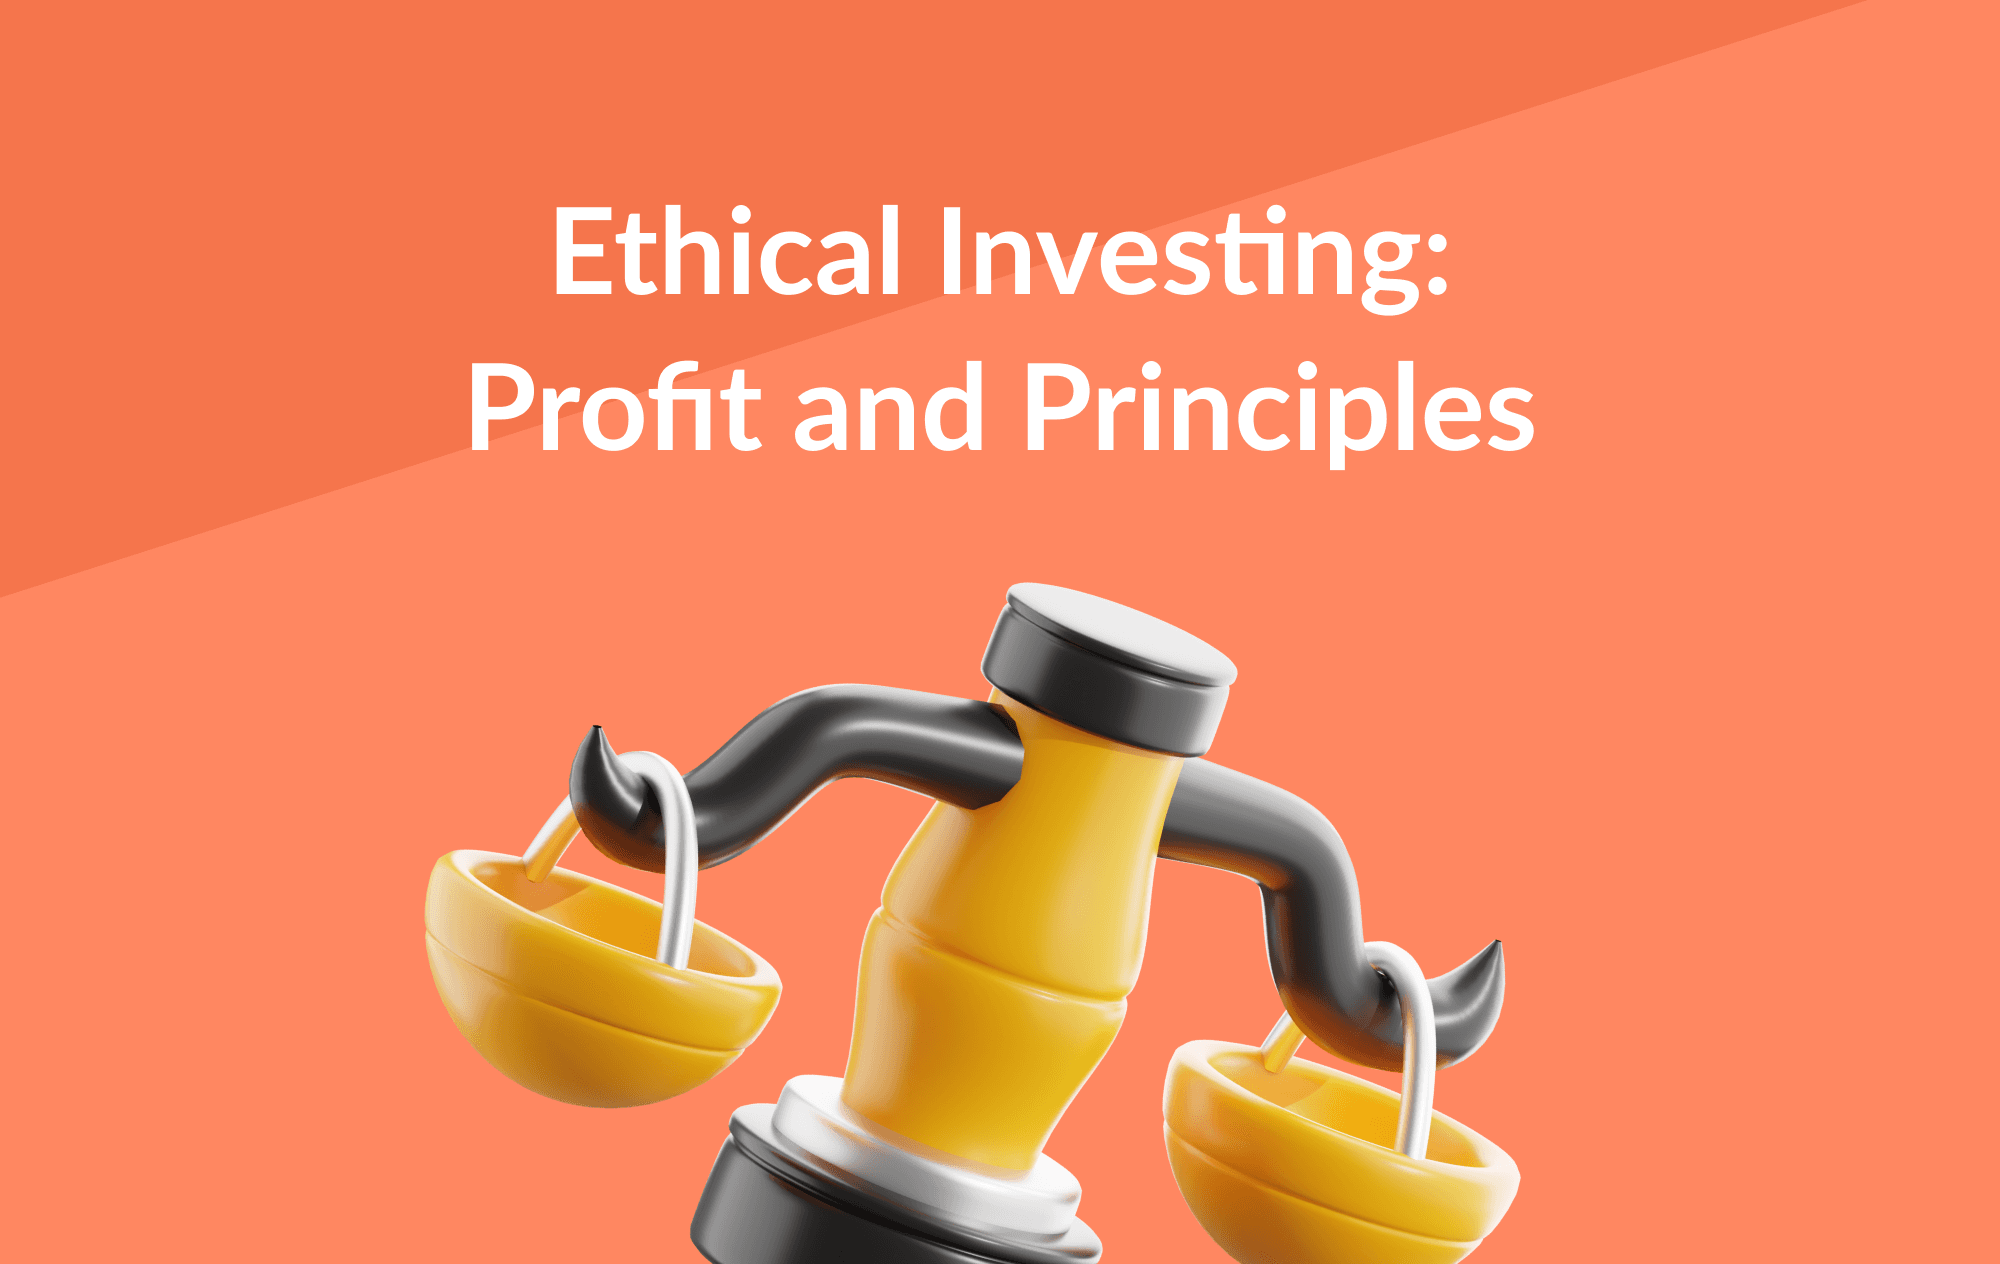 Ethical investing: Balancing Profit and Principles